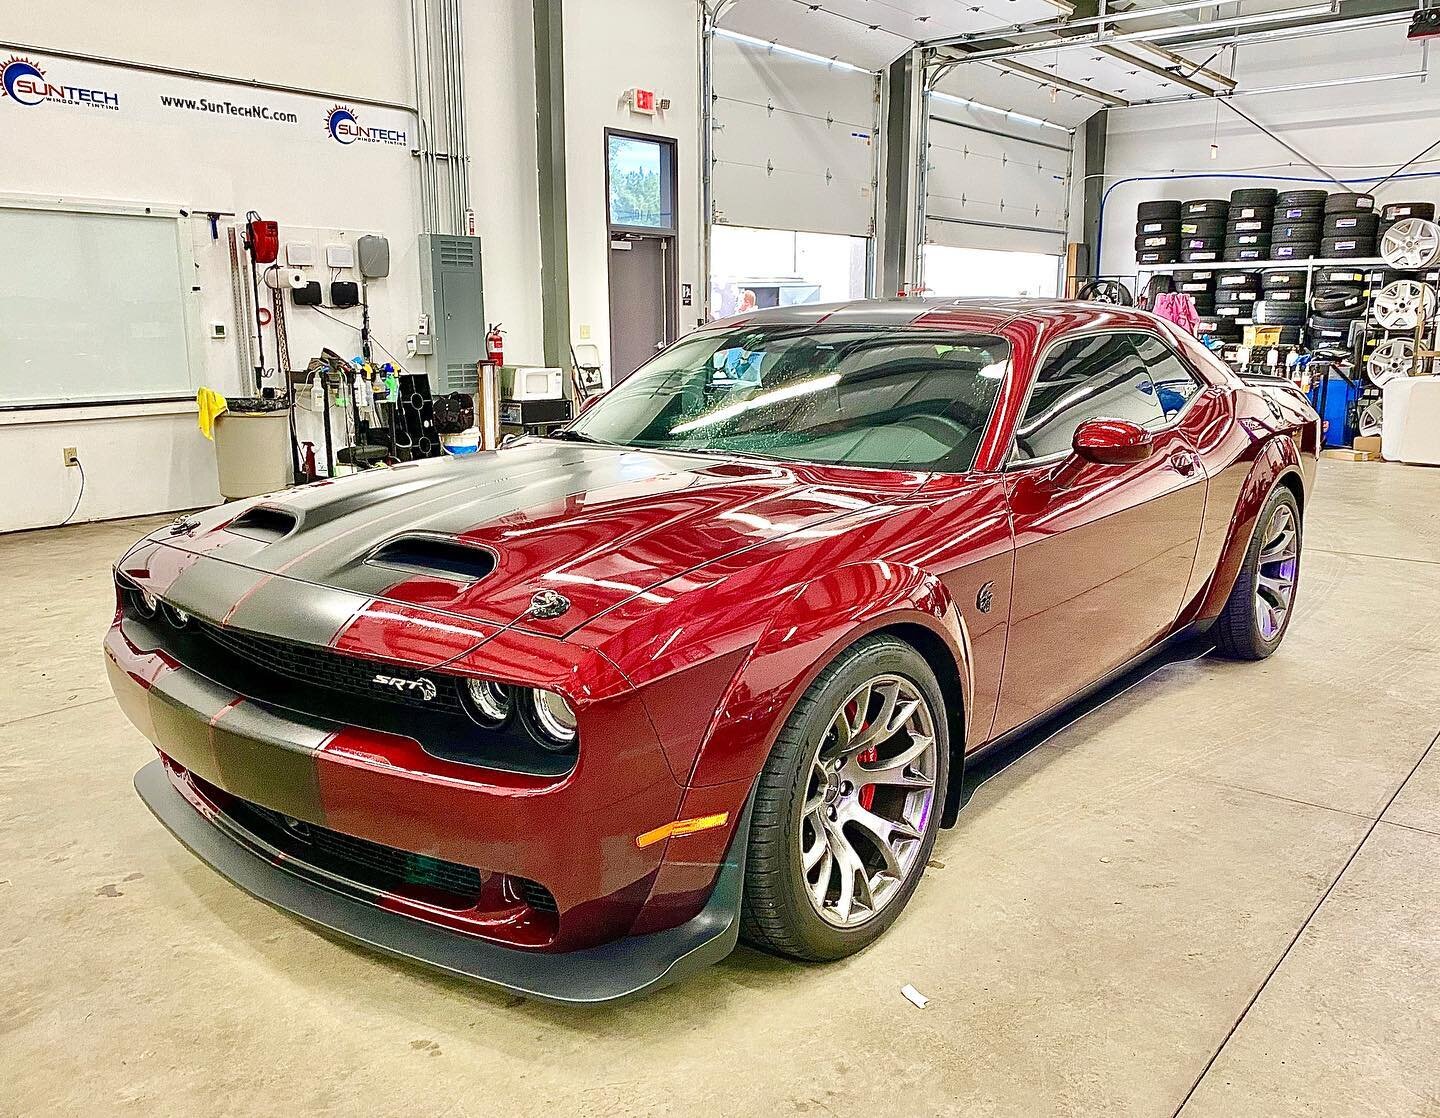 💪Flex🏋️ 
Great to catch up with Track Shaker Ambassador @srtscott at @cltautospa yesterday. His Widebody Hellcat is one of my favorite out there. Those Daytona wheels look amazing especially with the perfect stance courtesy of lowering springs from